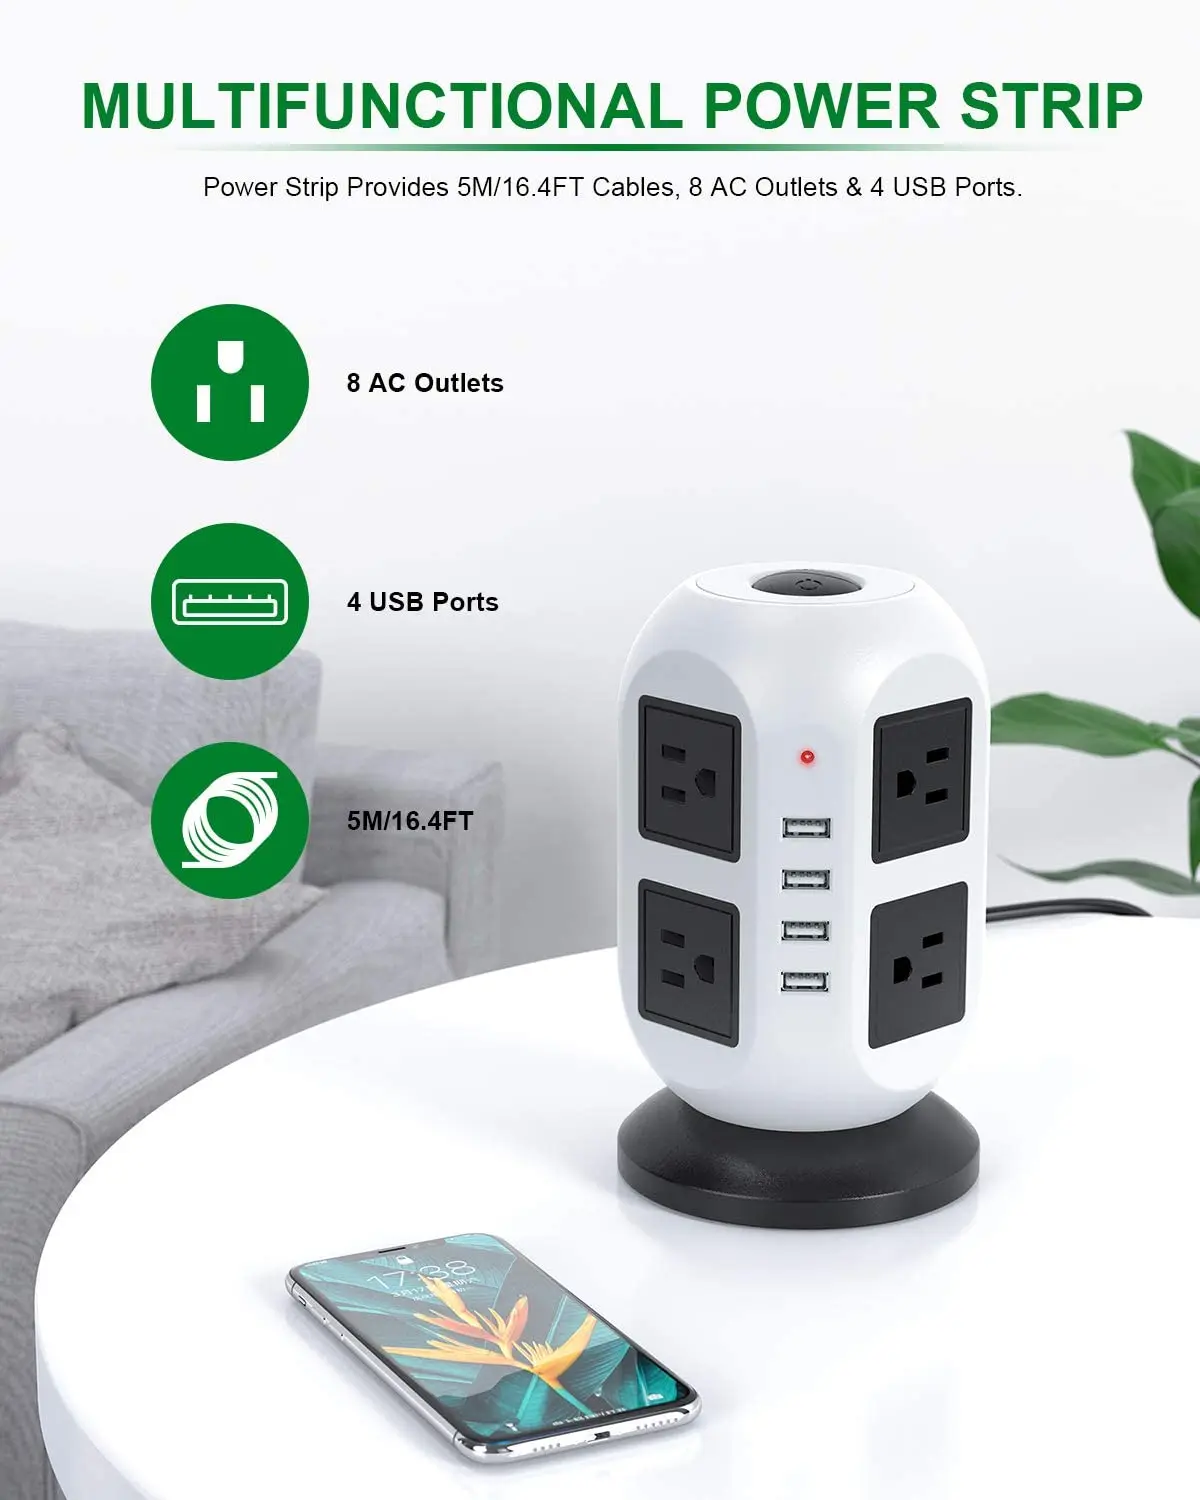 PSE Power Strip Tower With 8 AC Outlets 4 USB C Ports Surge Protector Universal Flexible Power Strip Tower Brazil